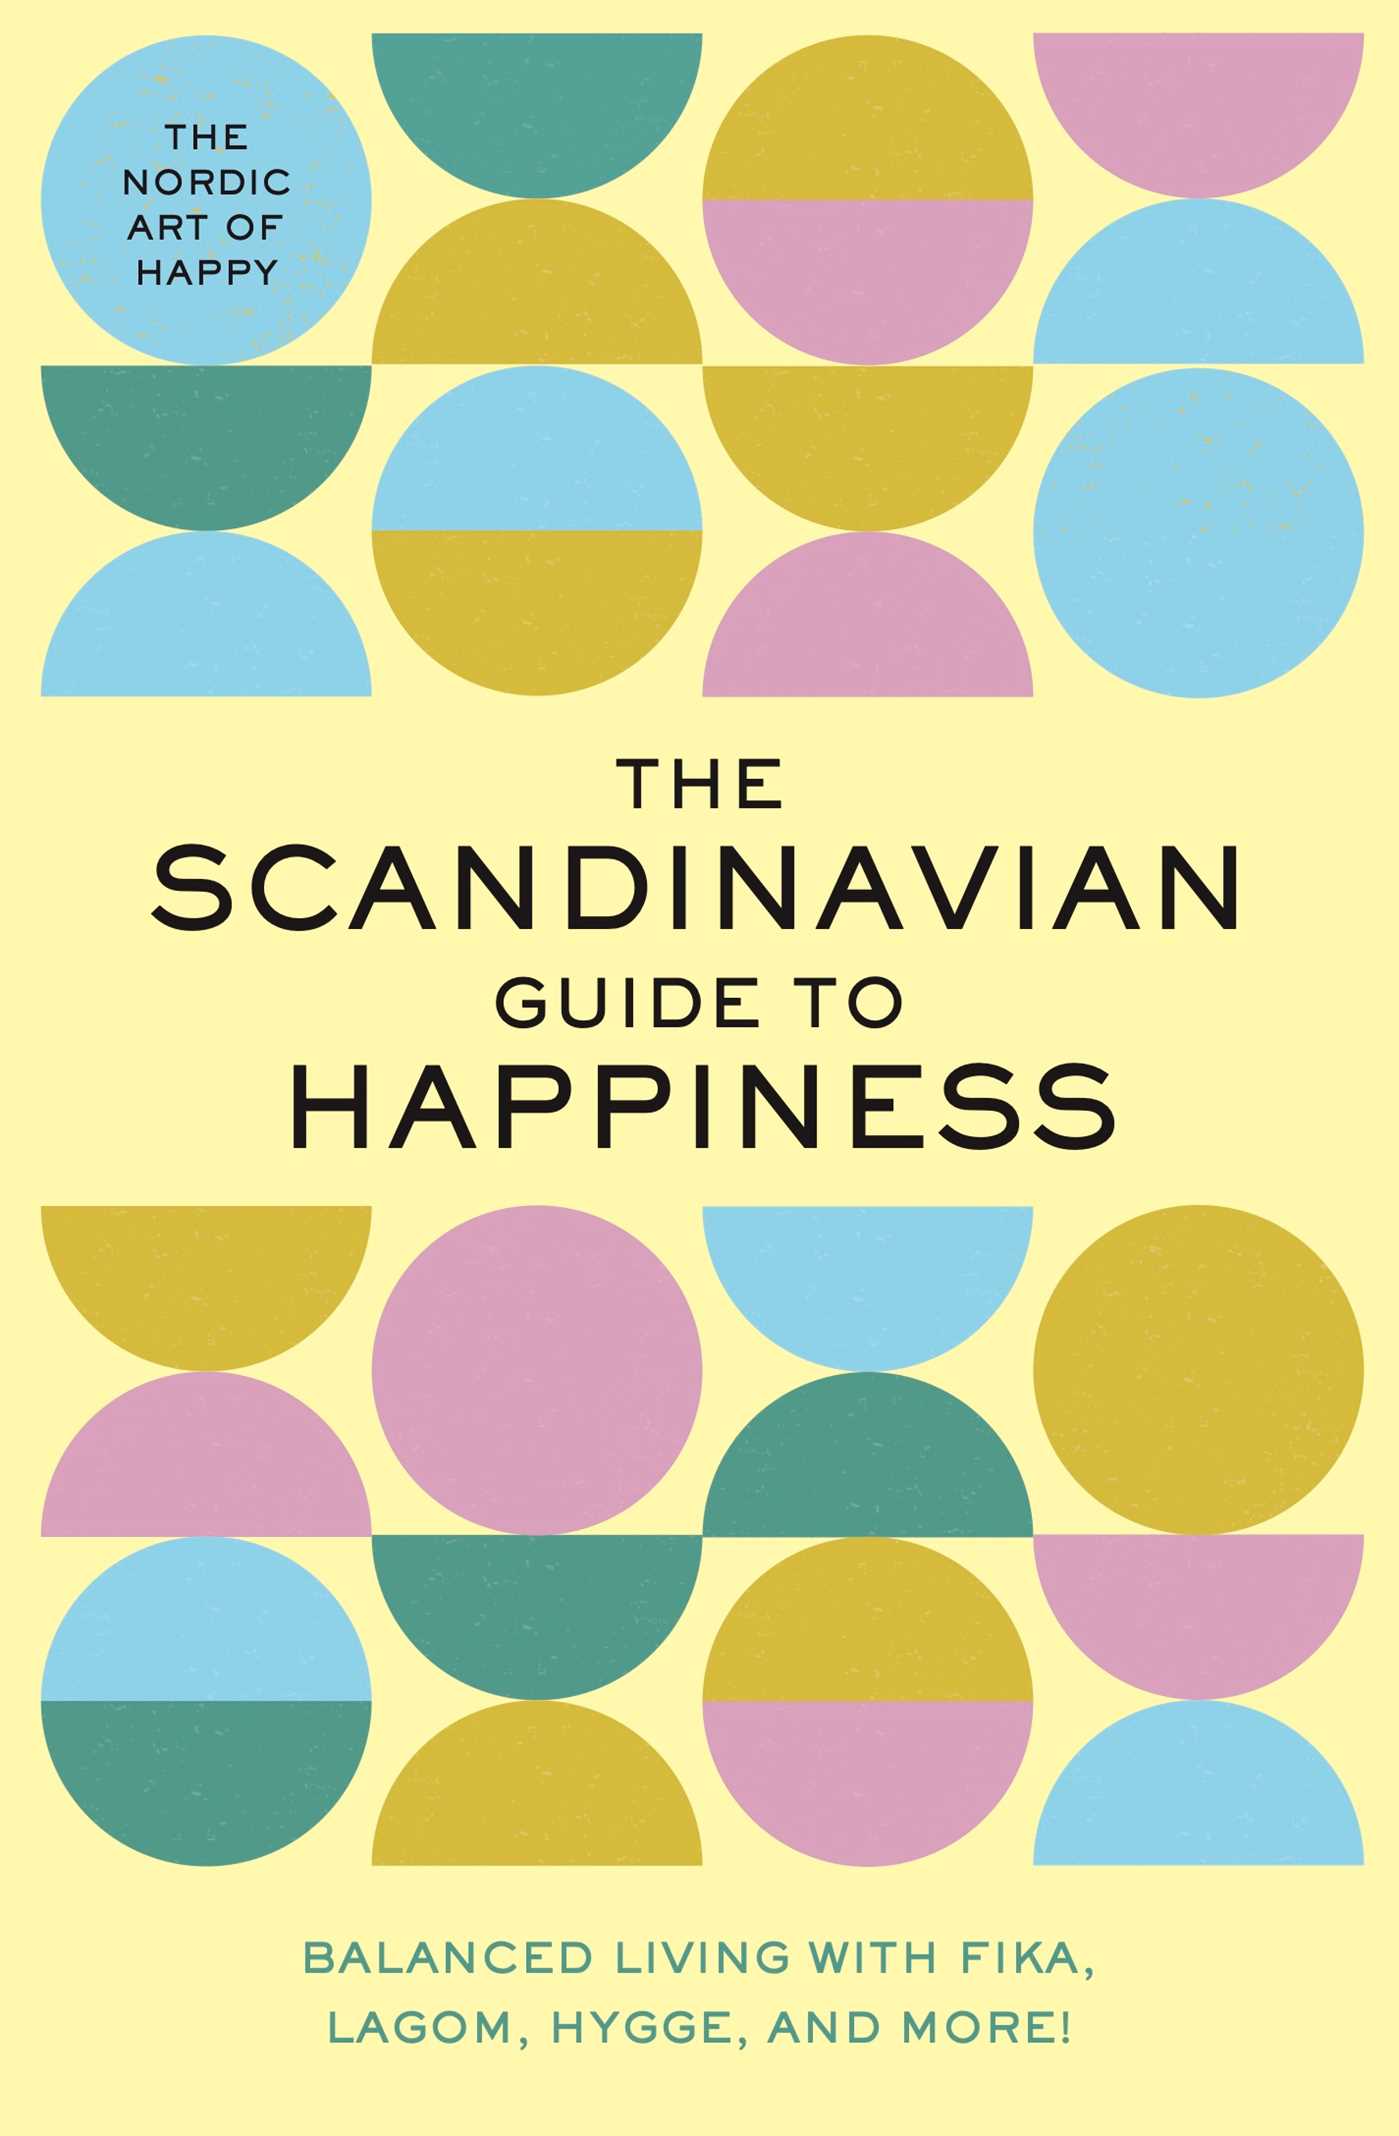 The Scandinavian Guide to Happiness : The Nordic Art of Happy &amp; Balanced Living with Fika, Lagom, Hygge, and More! | Editors of Whalen Book Works